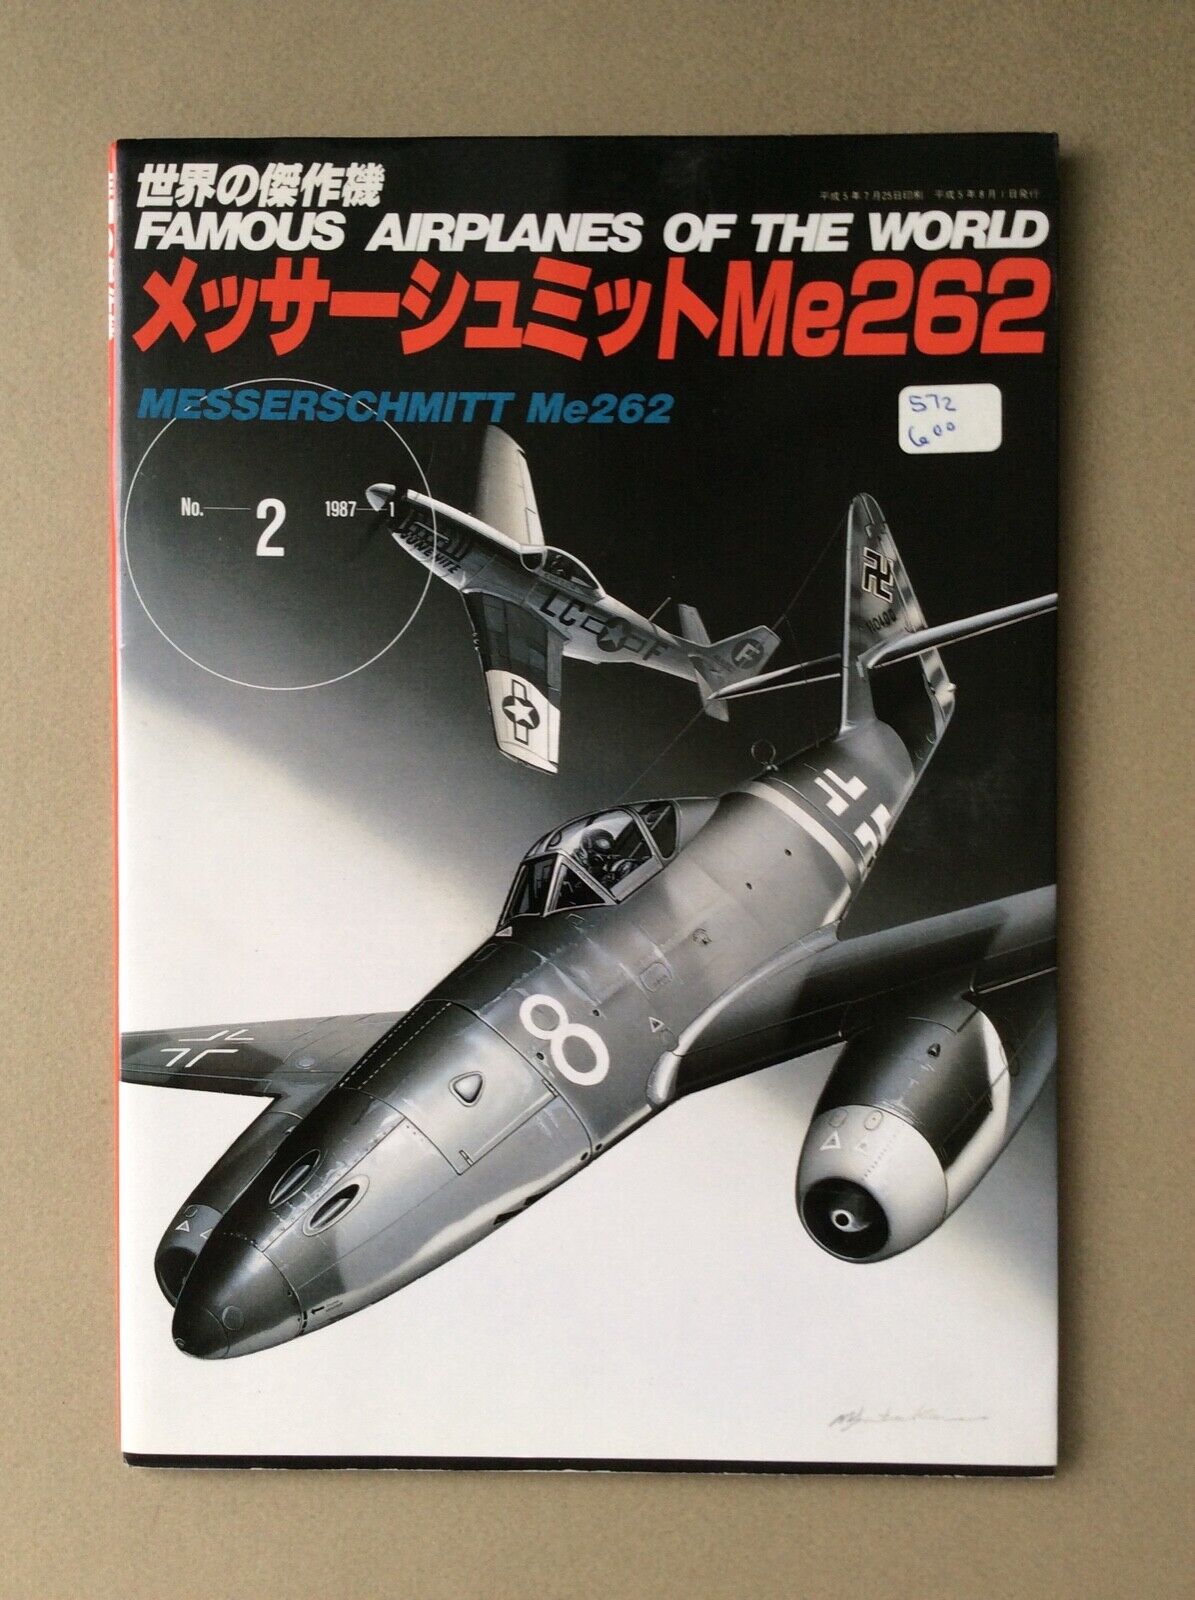 FAMOUS AIRPLANES OF THE WORLD No.2 MESSERSCHMITT Me262 Japan Japanese WWII FAOW